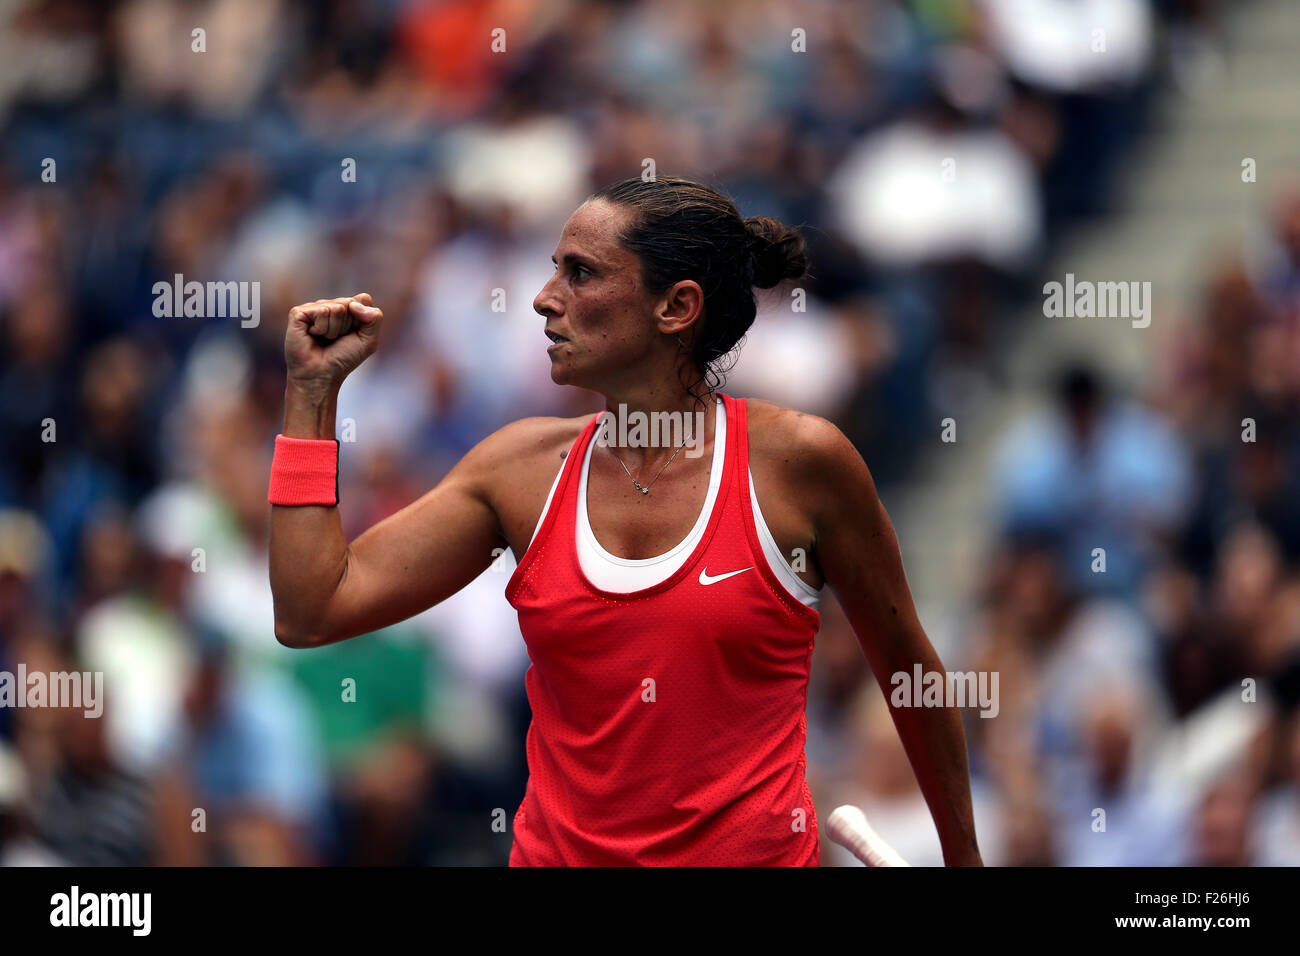 New York, USA. 12th Sep, 2015. Roberta Vinci of Italy during the women's final of the U.S. Open against countrywoman Flavia Penetta at Flushing Meadows, New York on the afternoon of September 12th, 2015.  Pennetta won the match 7-6 (7-4), 6-2 Credit:  Adam Stoltman/Alamy Live News Stock Photo